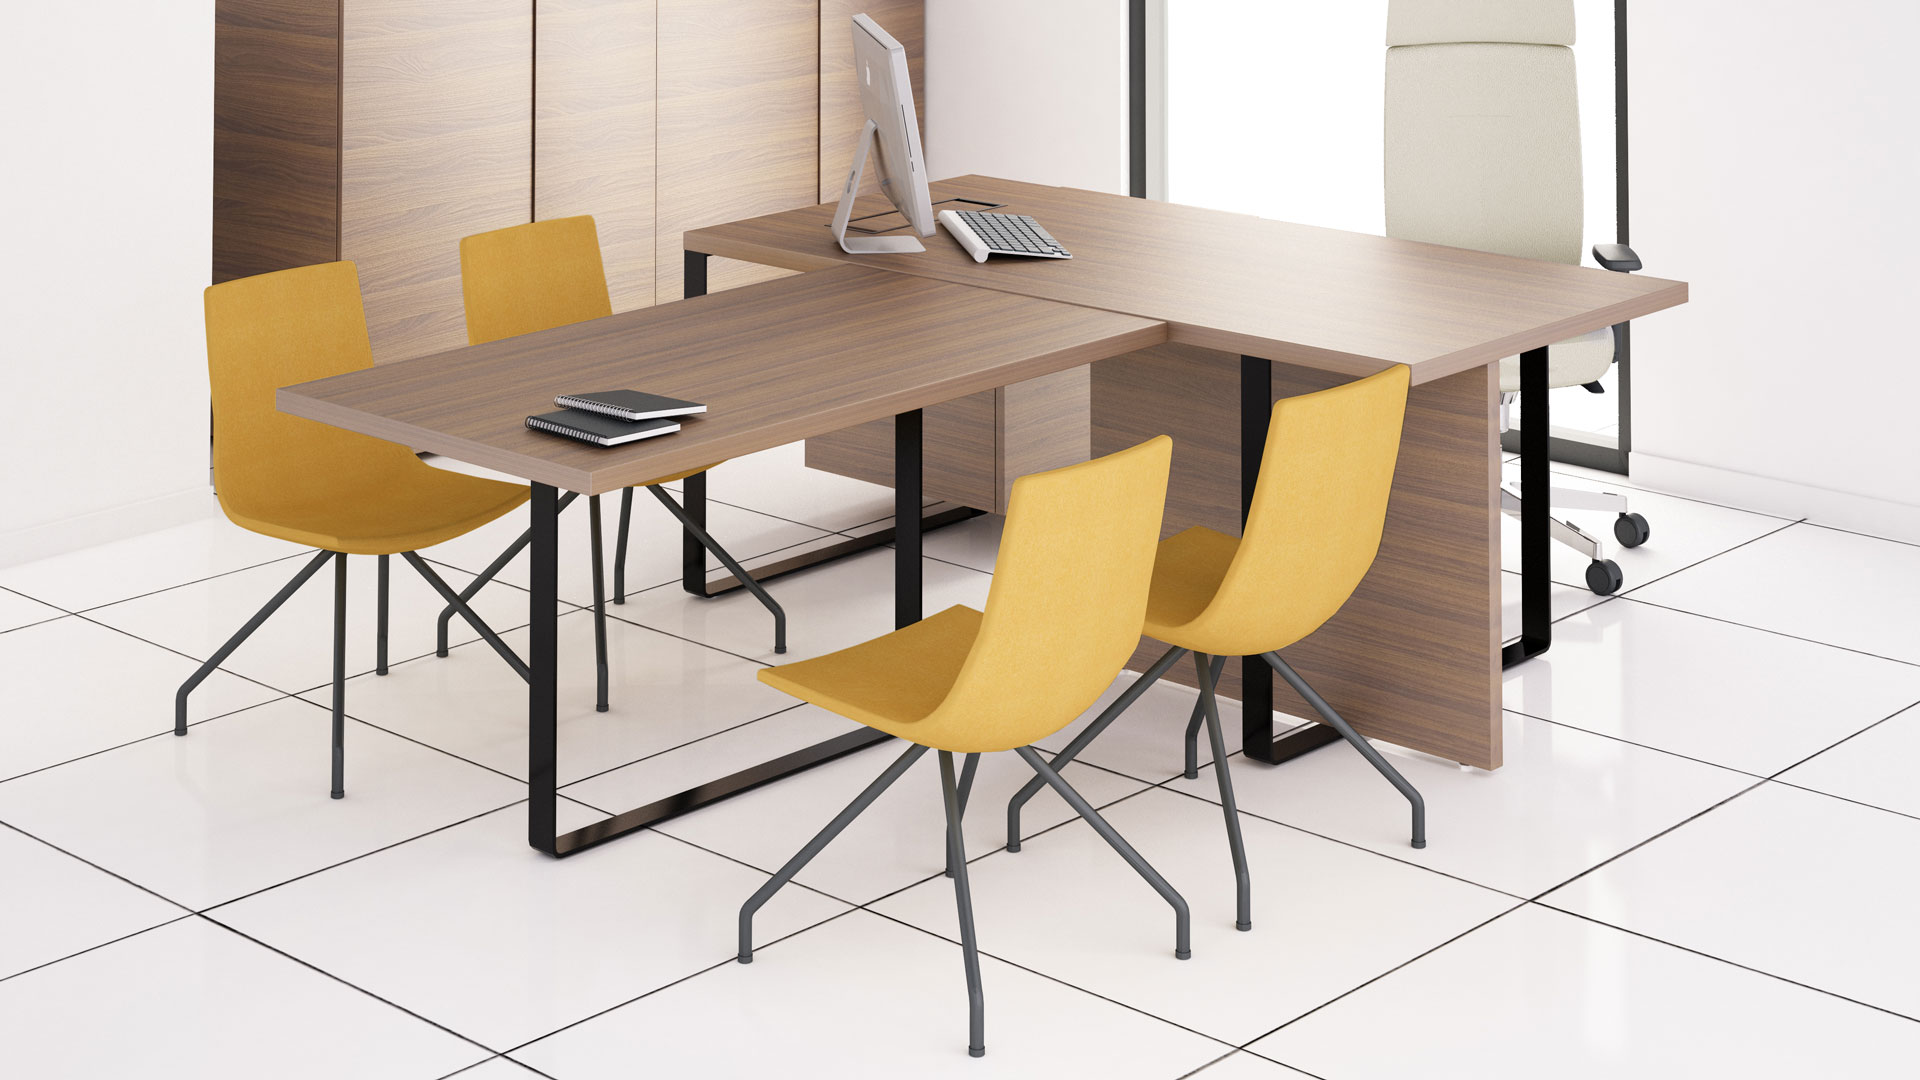 Plana executive desk combined with meeting table and North Cape meeting chairs